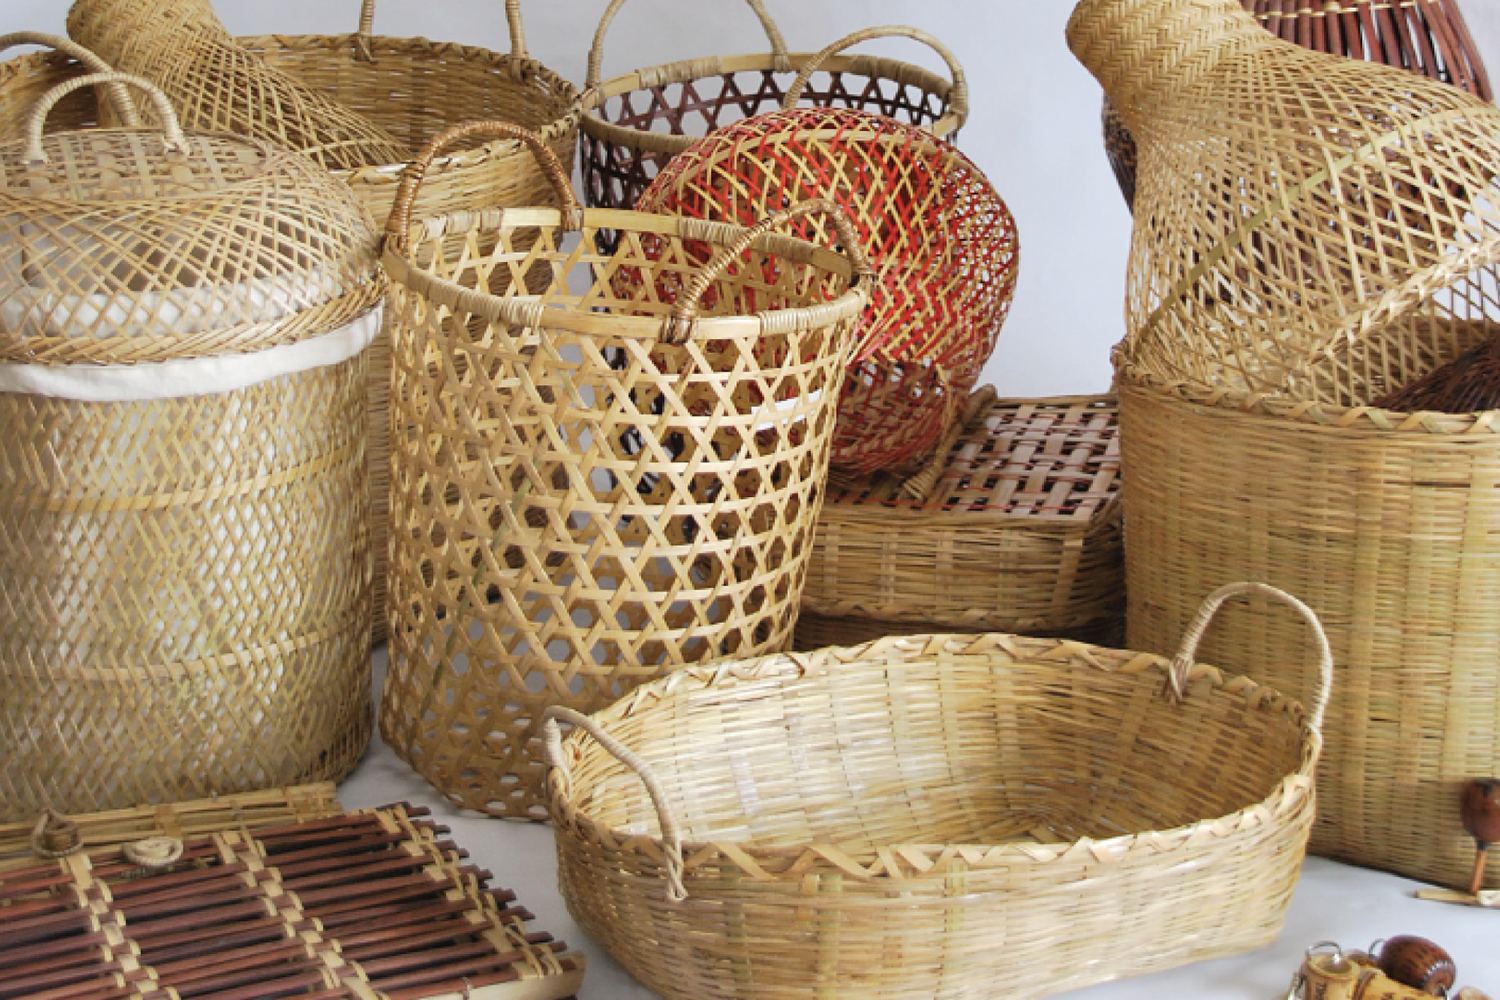 Prototypes of all objects made with bamboo weave technique